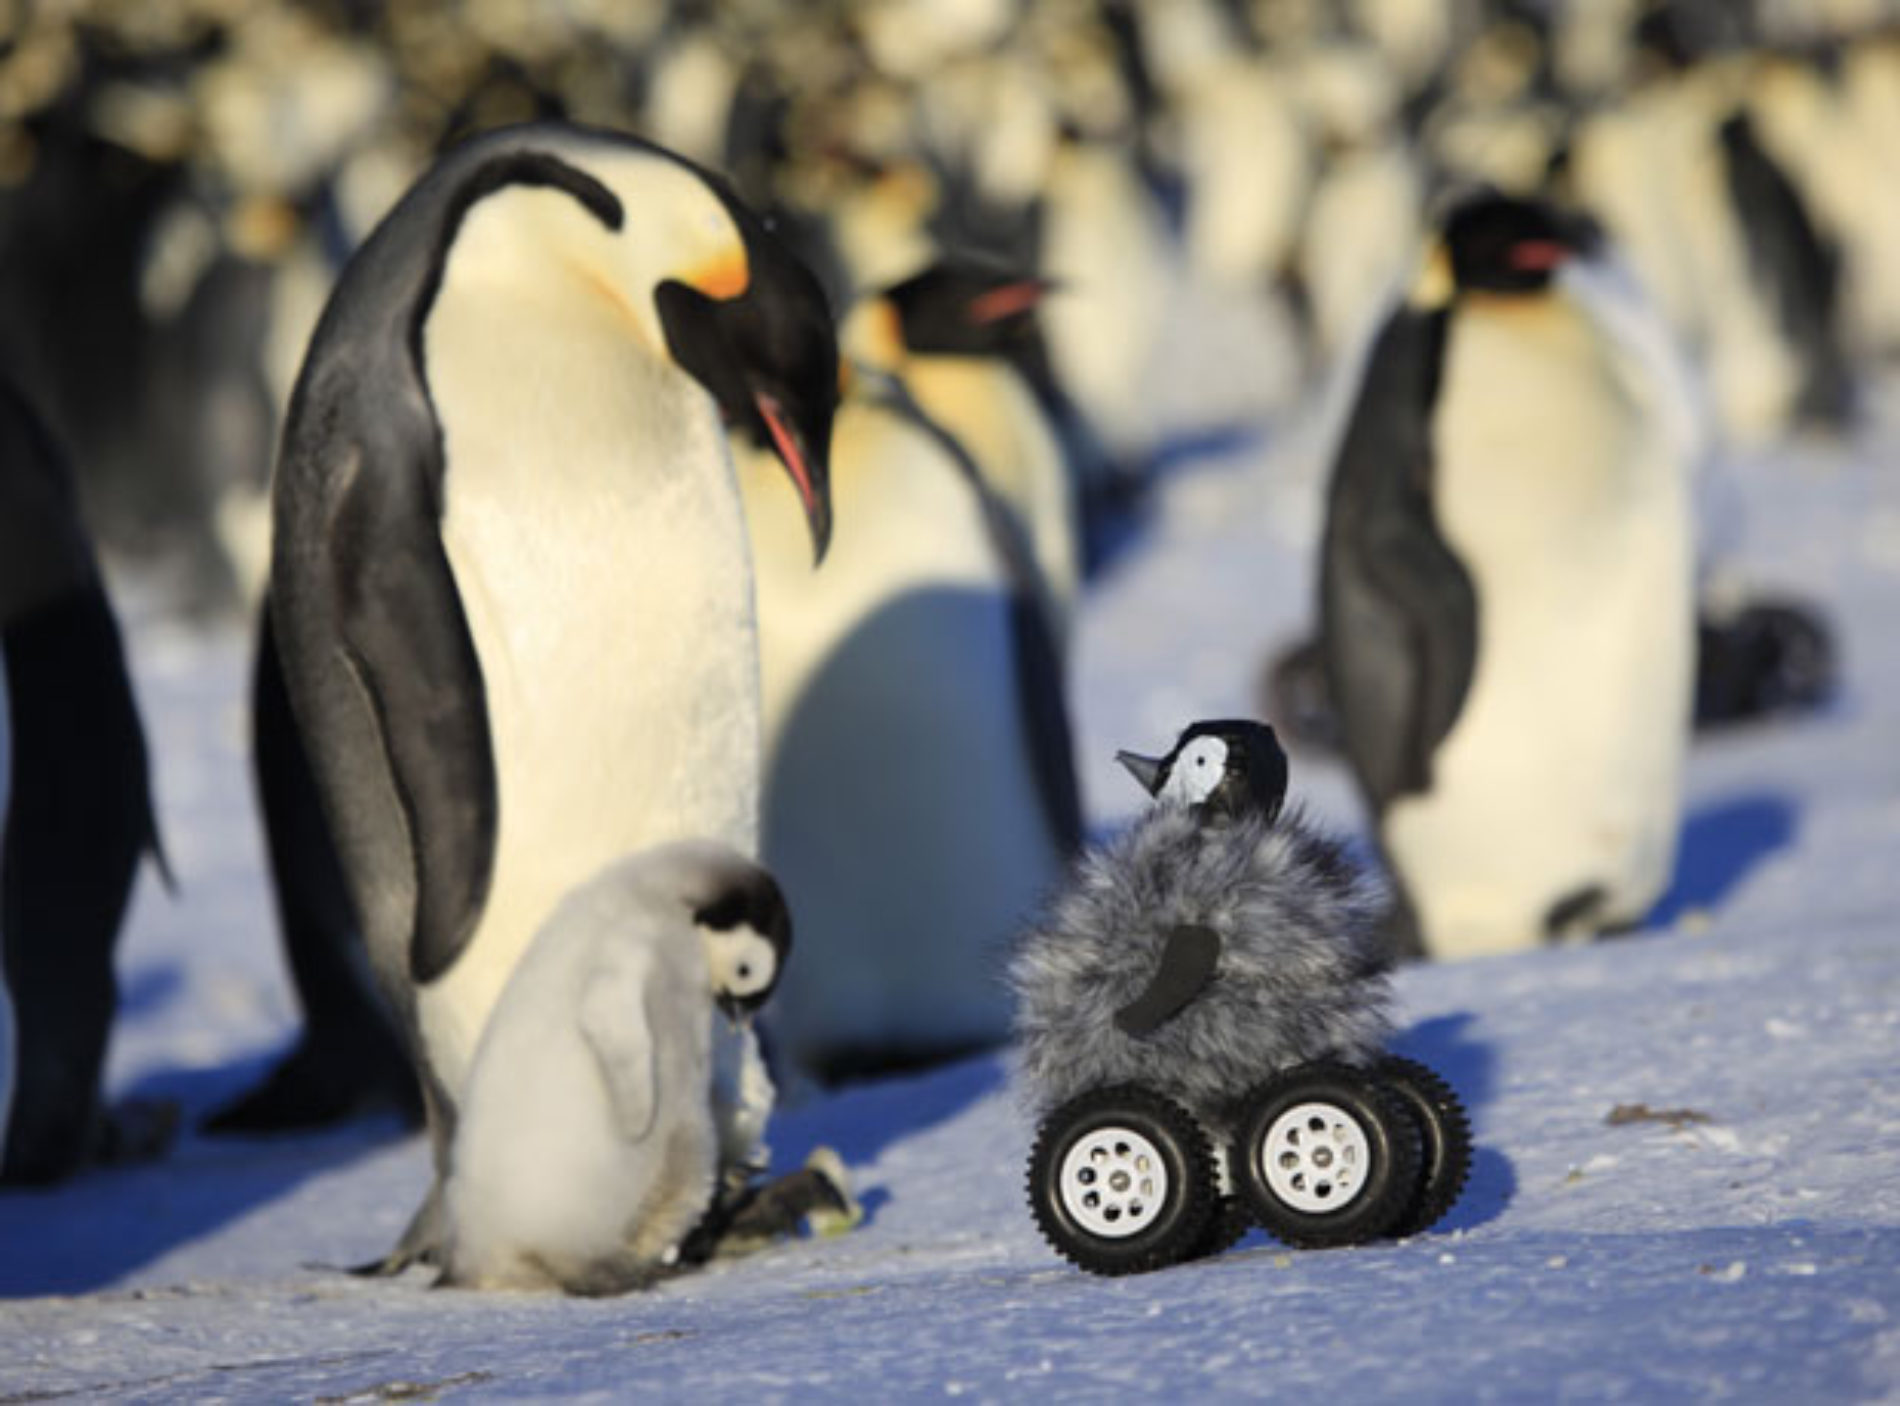 Fluffy Little Rovers Are an Effective, Adorable Way of Monitoring Penguins